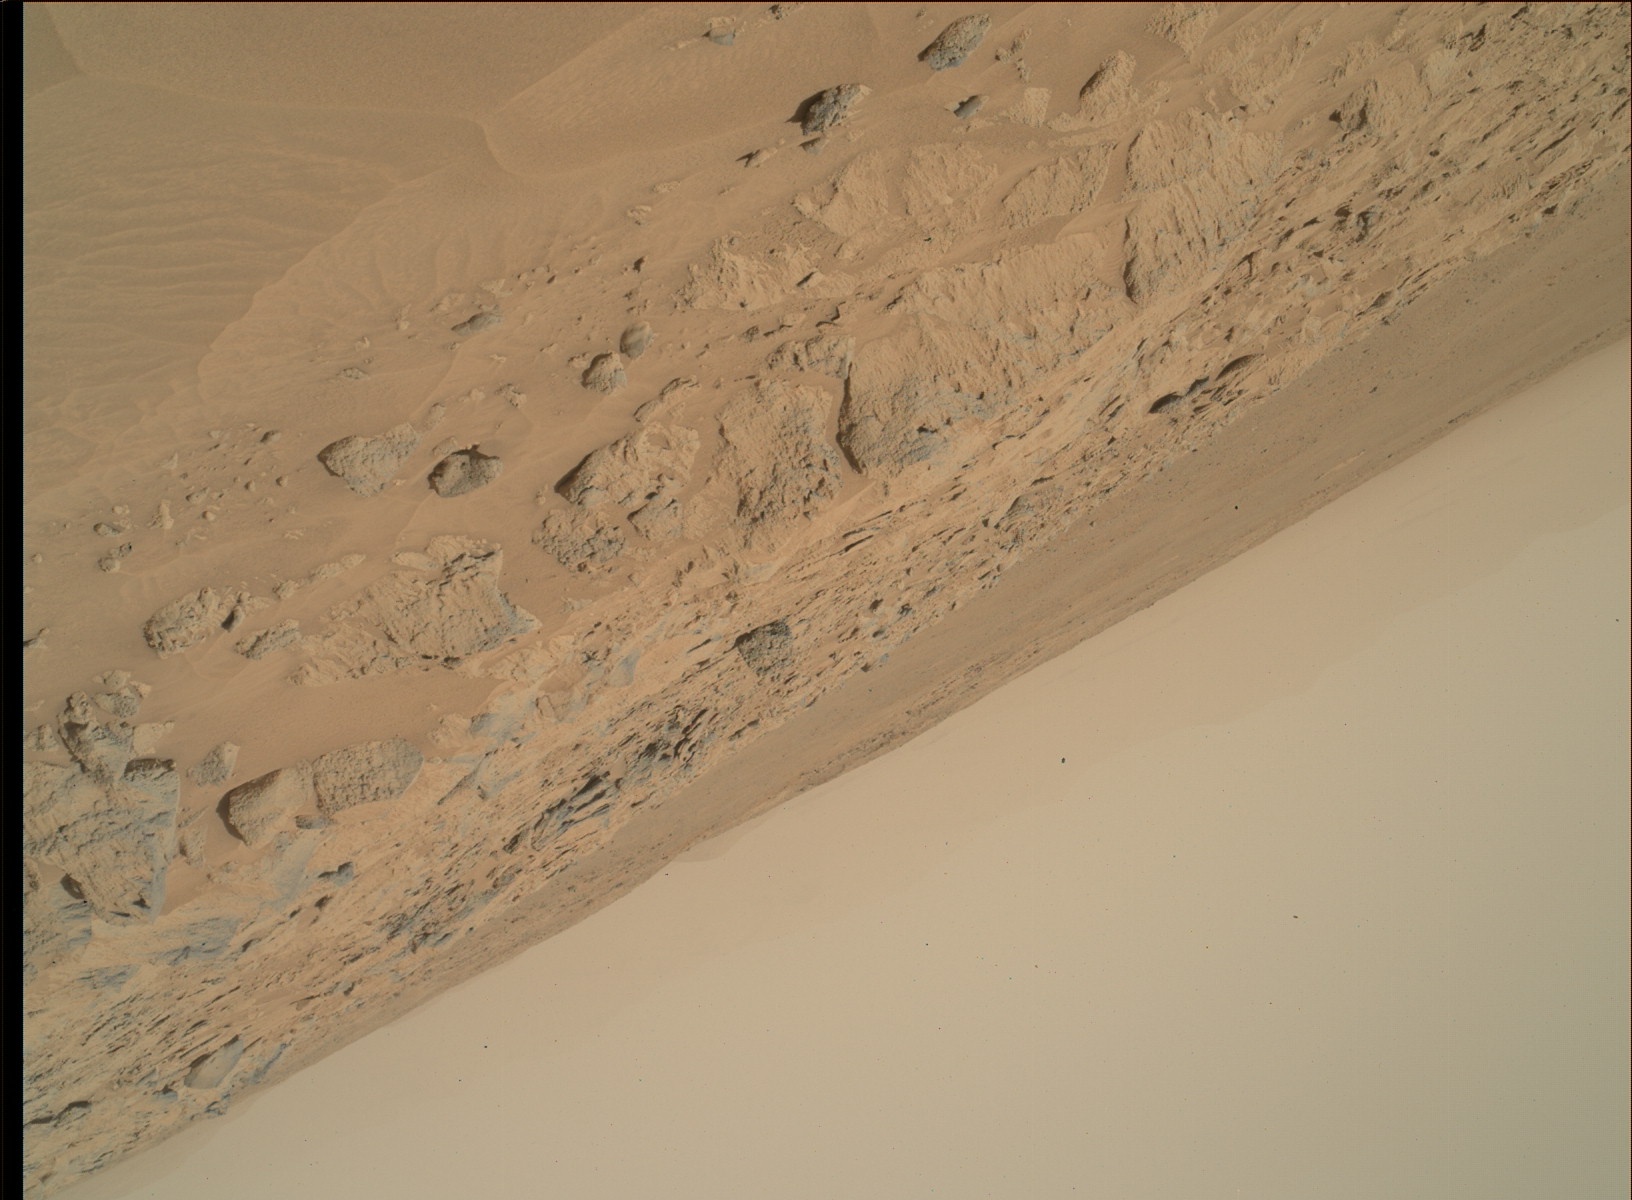 Nasa's Mars rover Curiosity acquired this image using its Mars Hand Lens Imager (MAHLI) on Sol 690